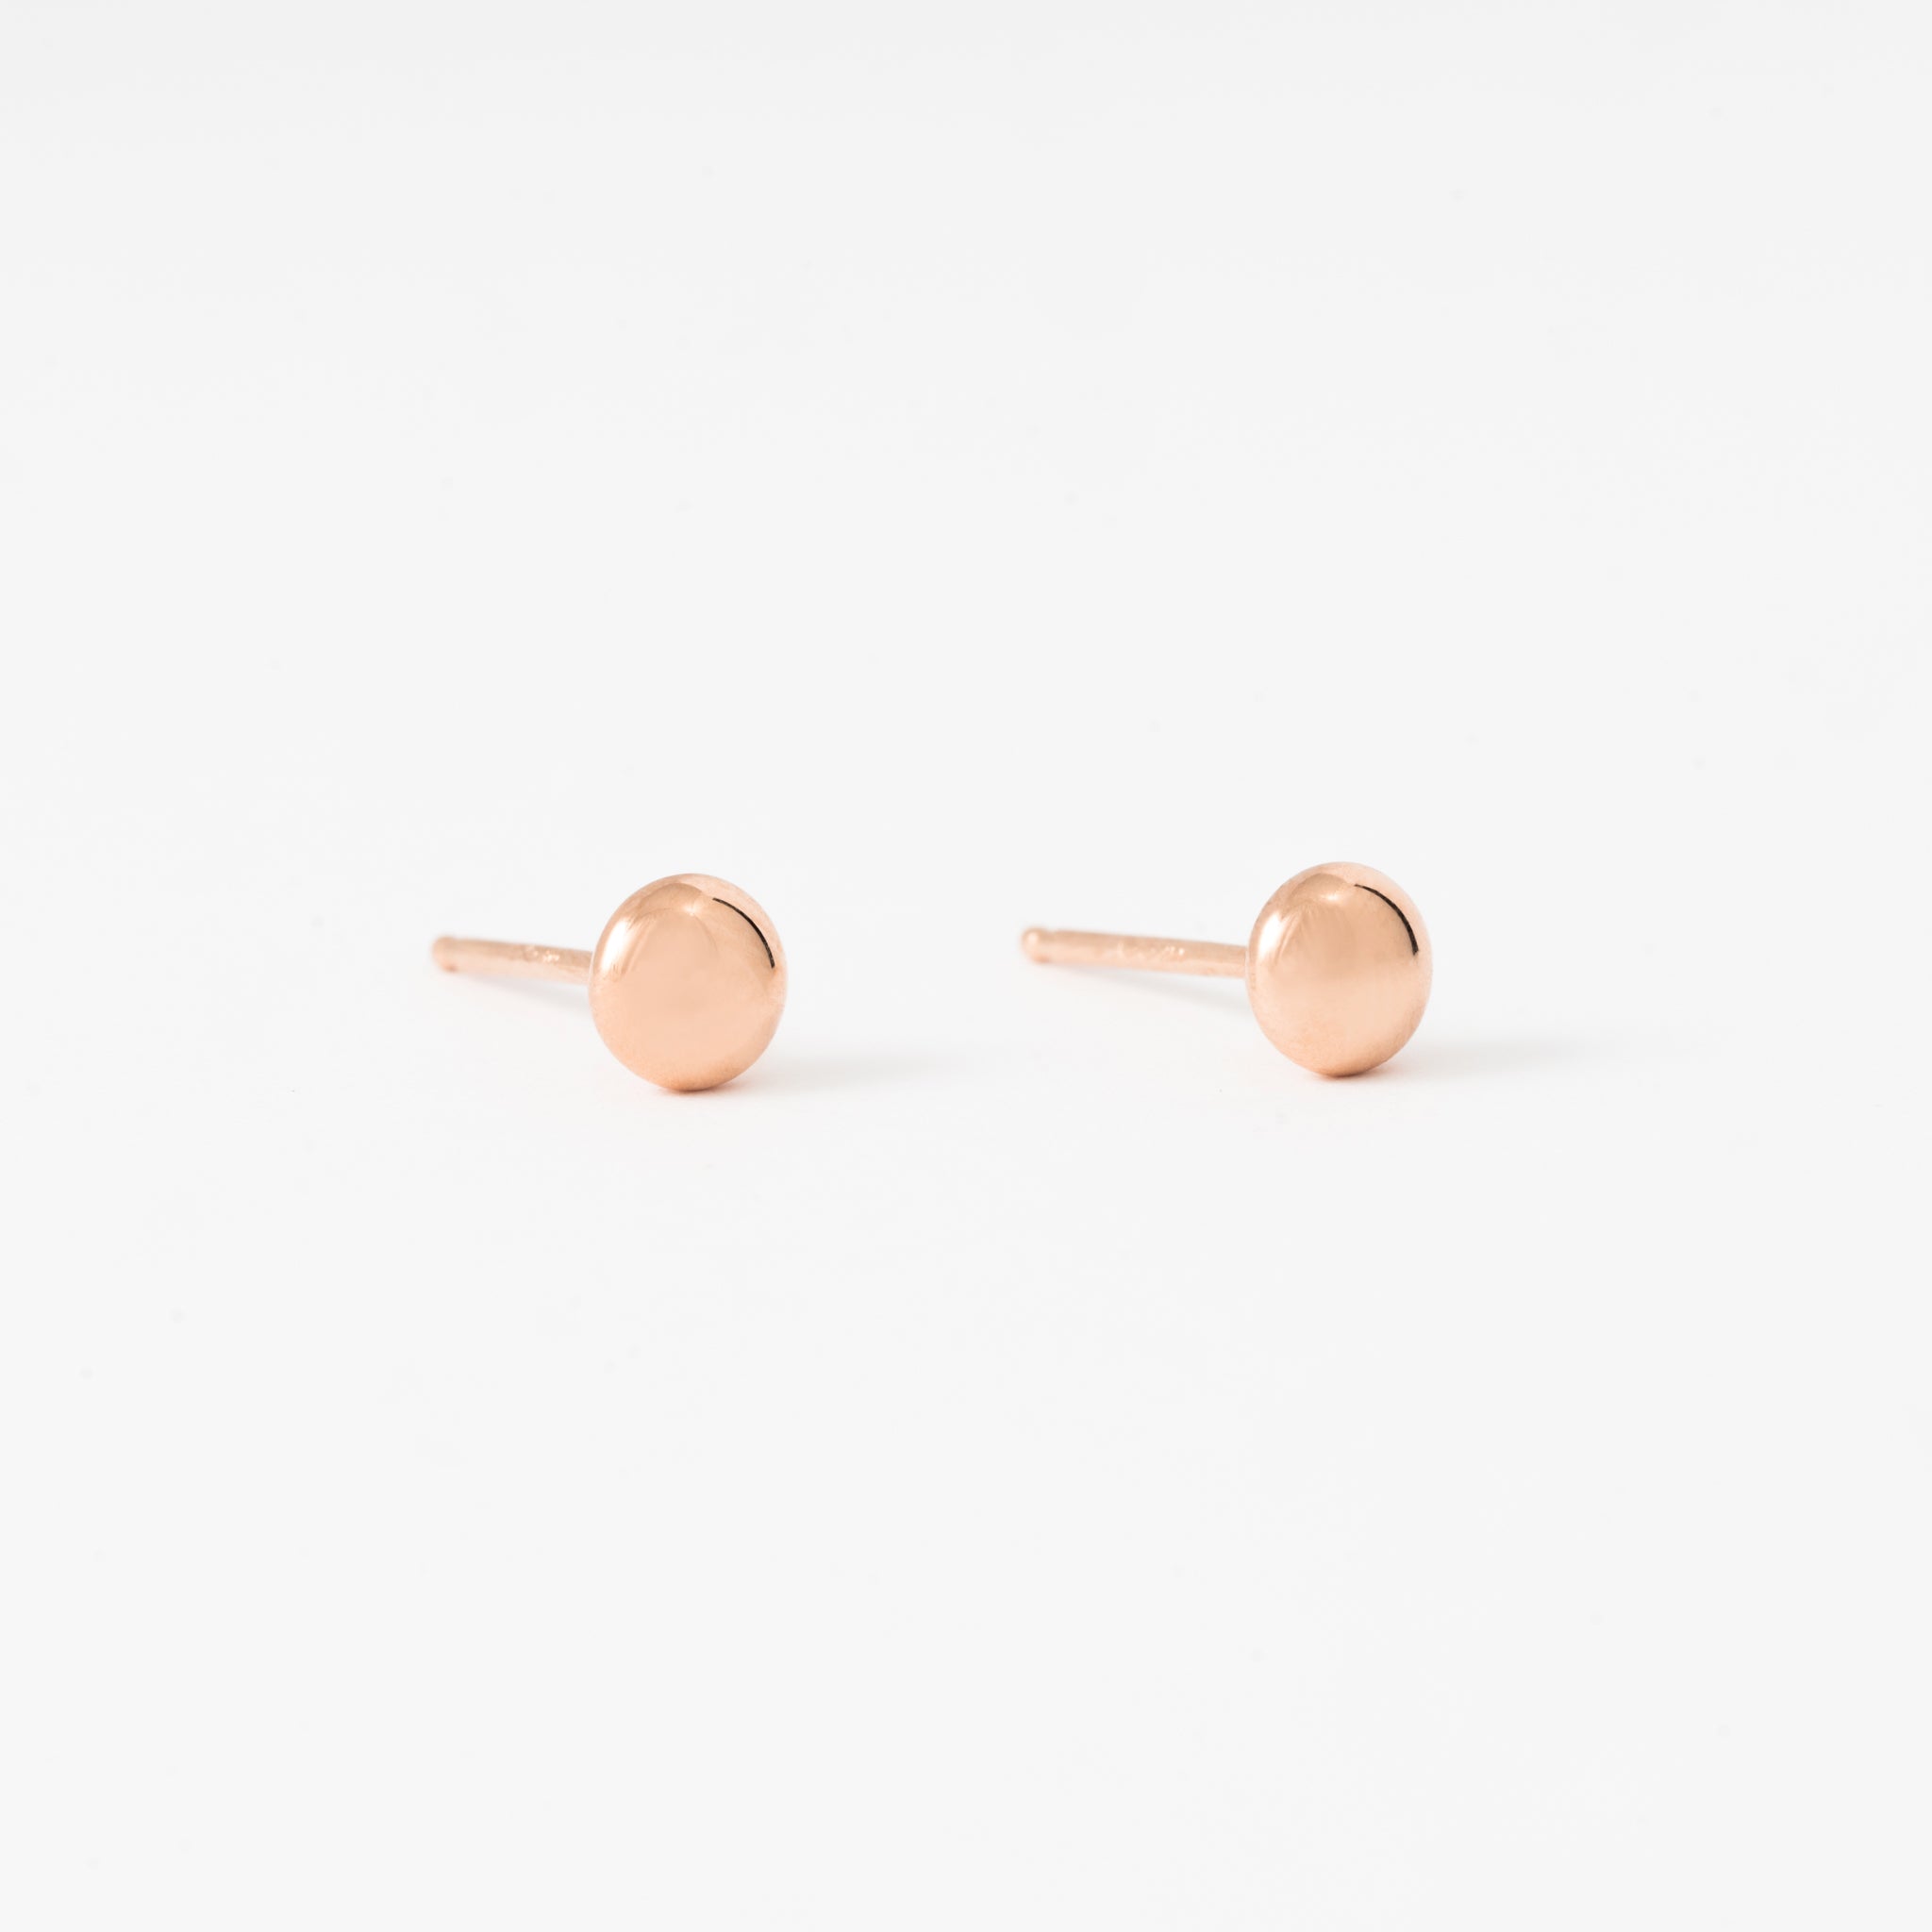 Gone To Seed Earrings - Small Stud Gold